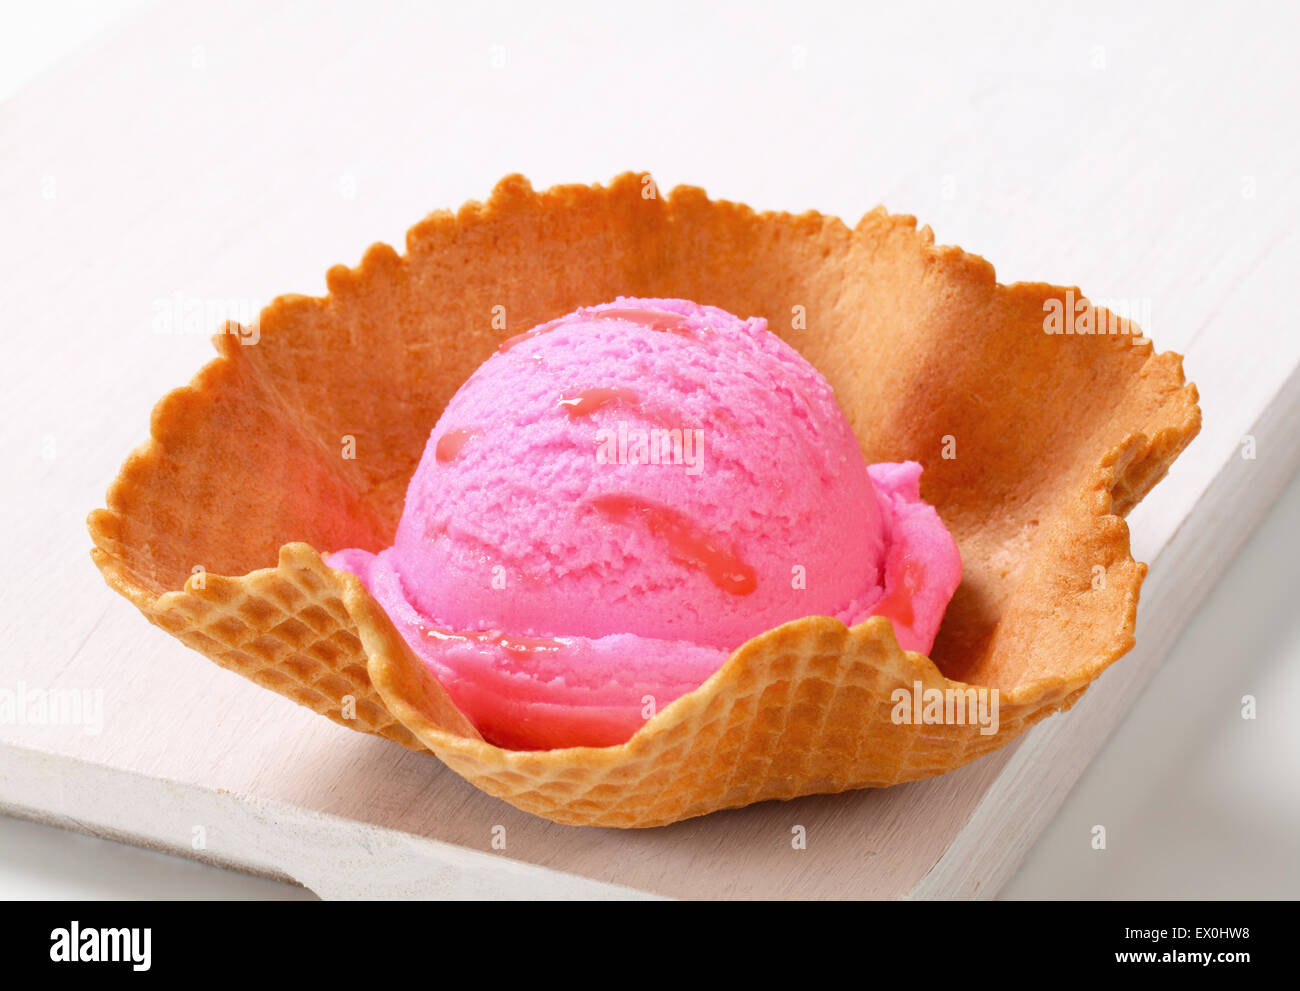 Pink fruit flavored ice cream in a waffle basket Stock Photo